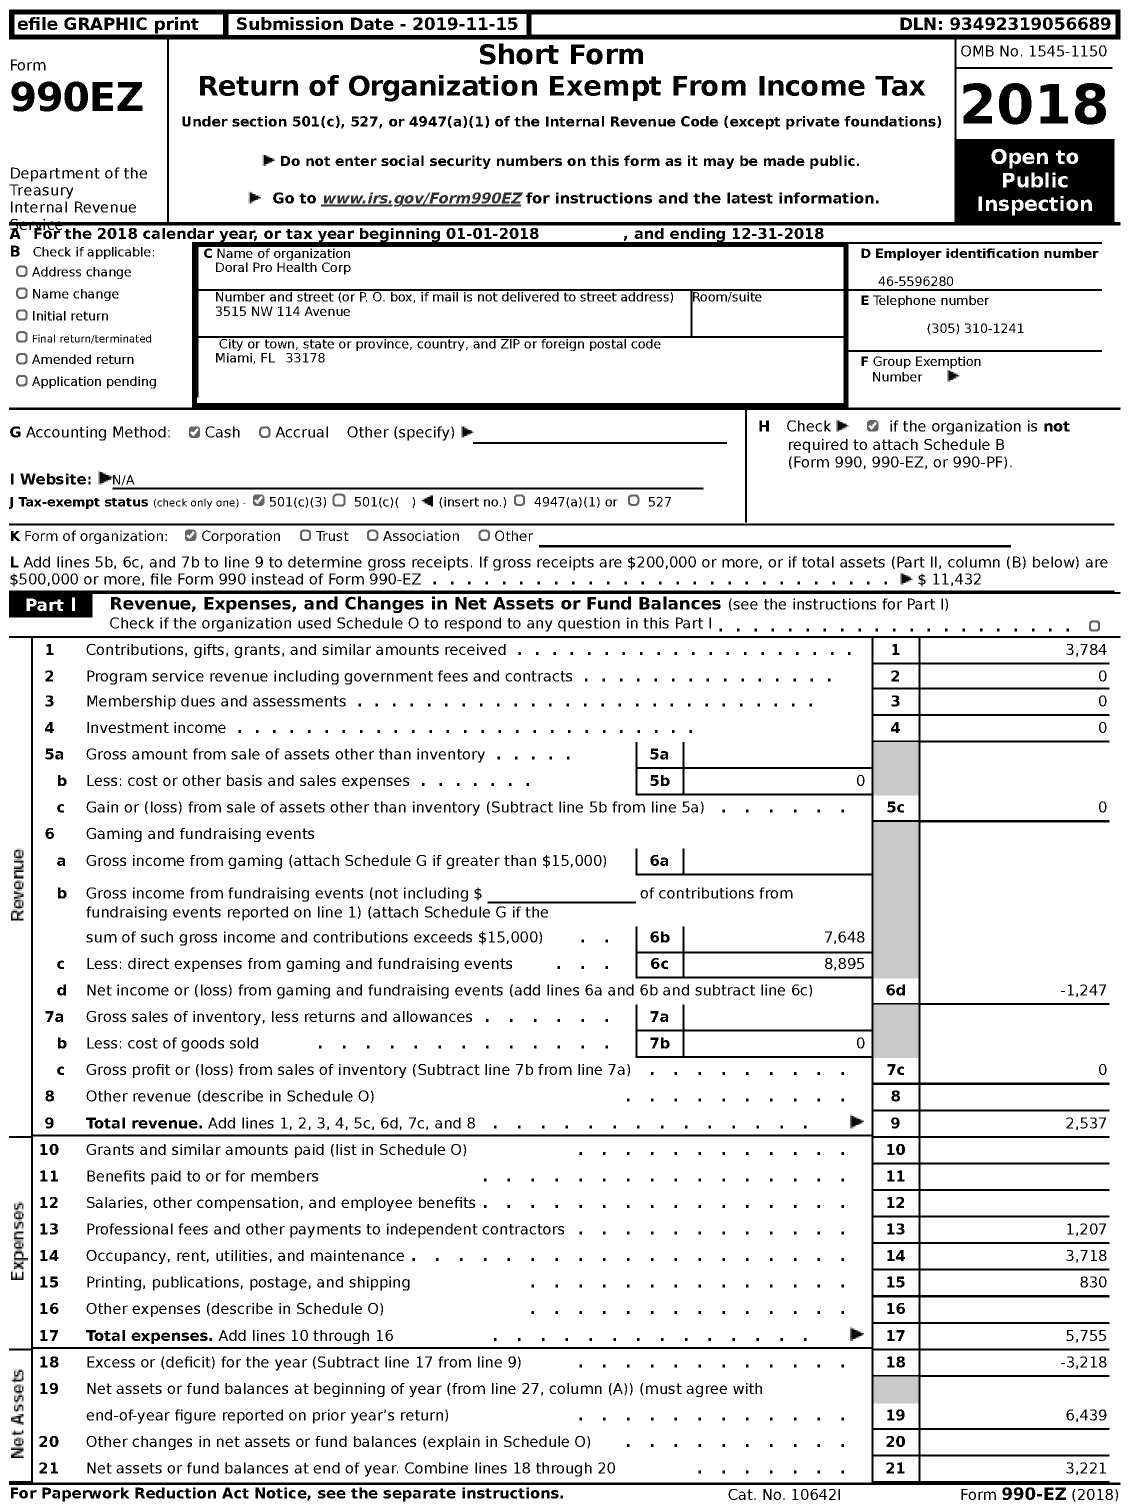 Image of first page of 2018 Form 990EZ for Doral Pro Health Corporation